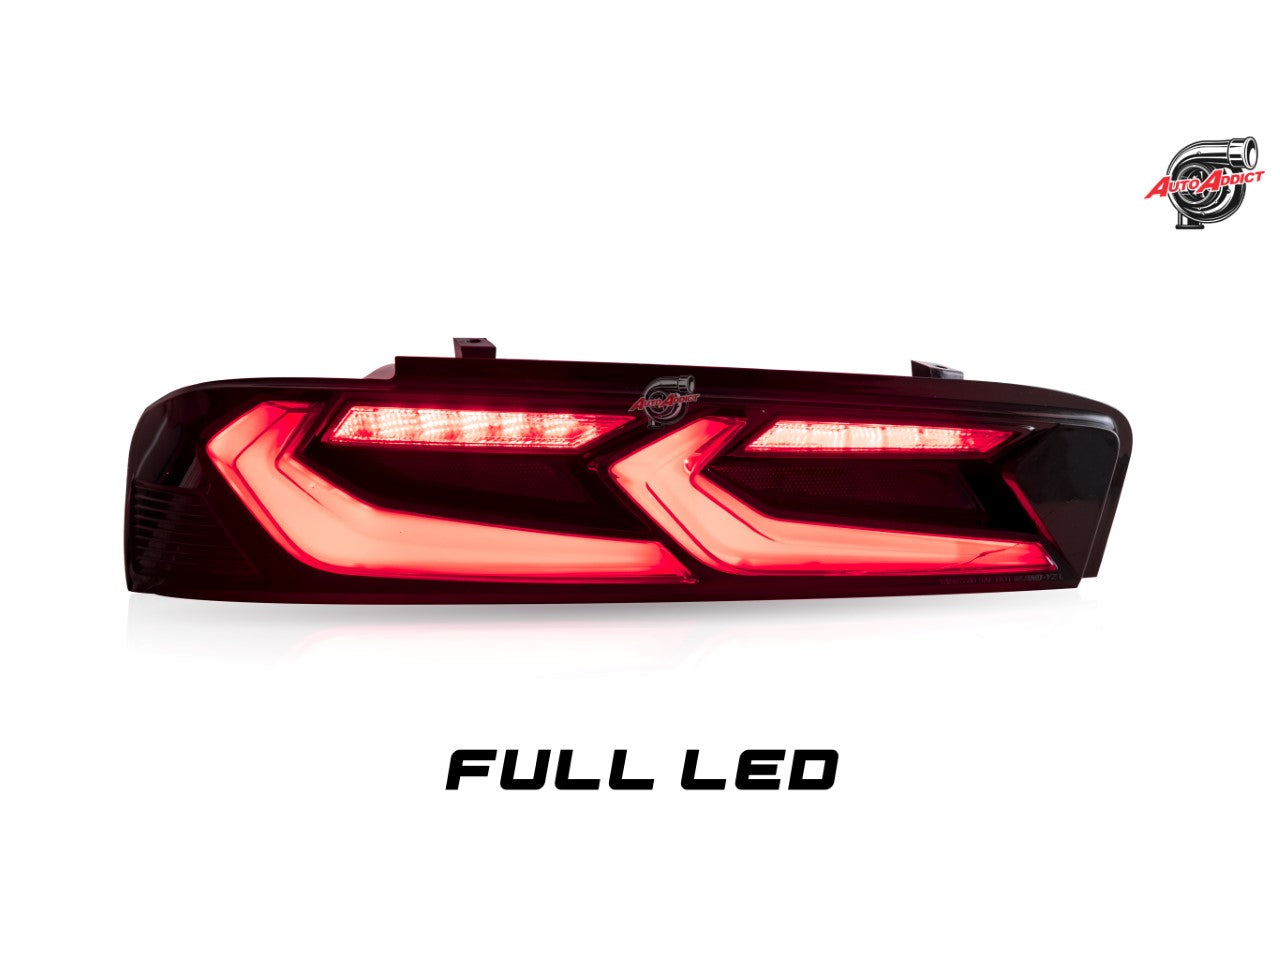 2016-2018 Chevy Camaro Velox Amber Sequential LED Taillights Gloss BLK/ Red Lens